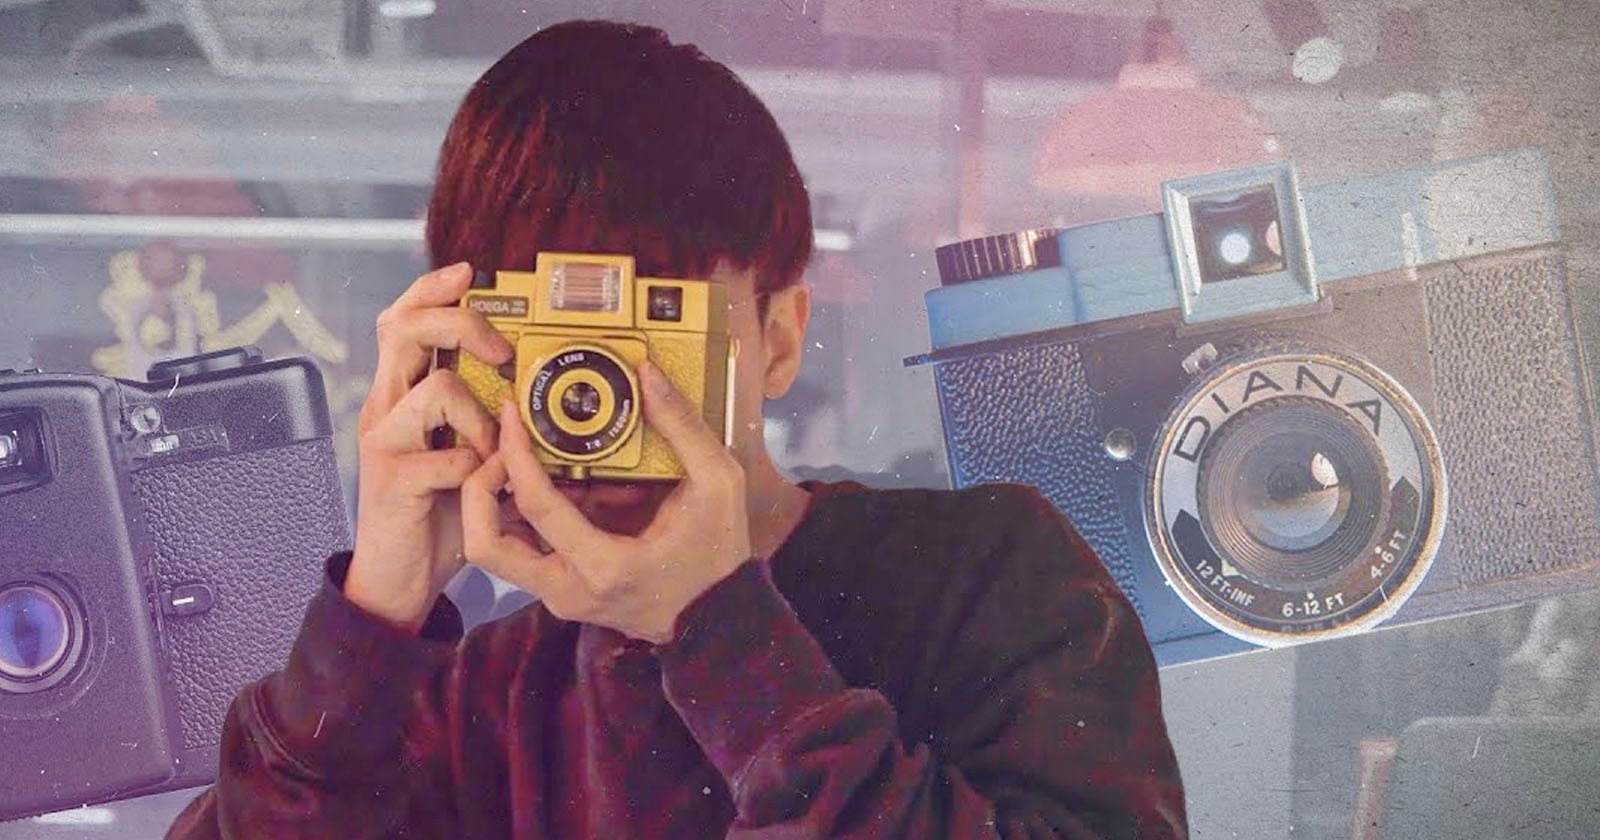 Meet the Toy Camera at the Heart of the Analogue Revival